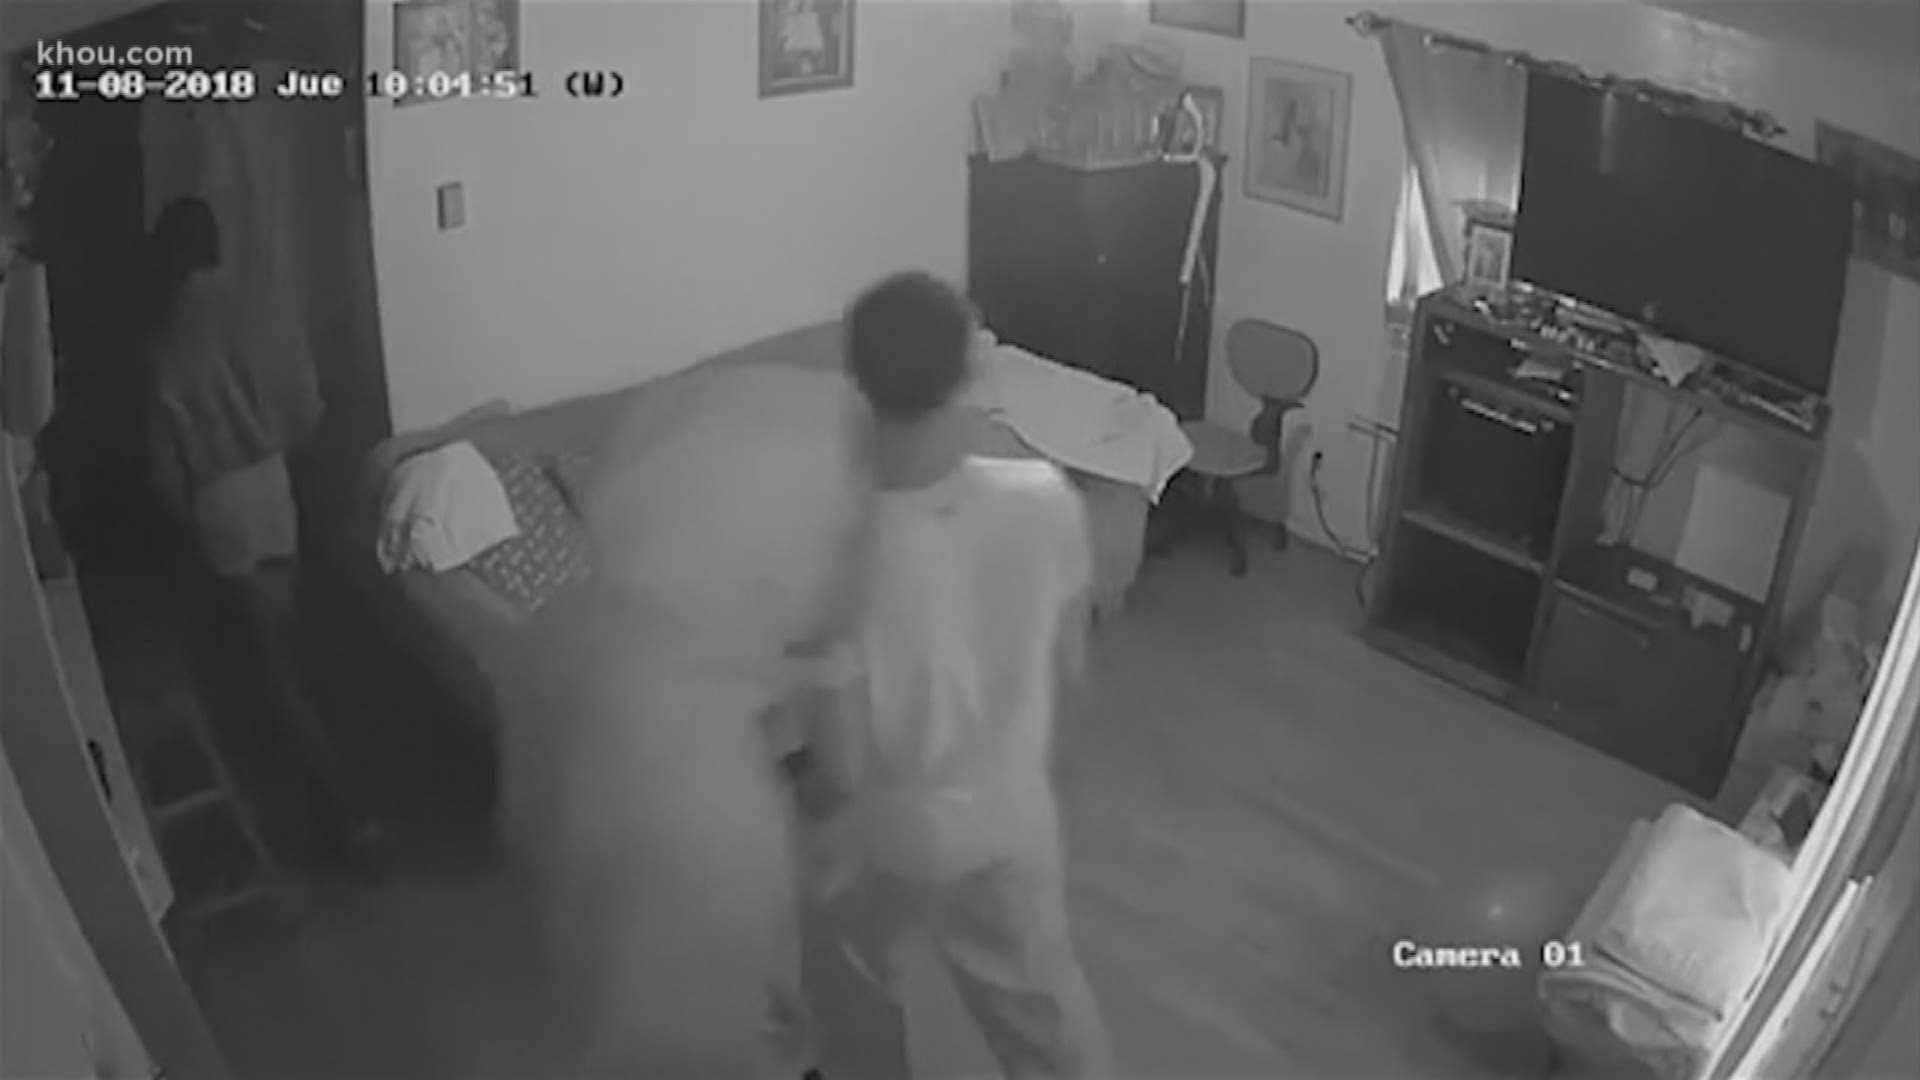 Police are searching for armed robbery suspects caught on camera going through a woman’s home while she was asleep.